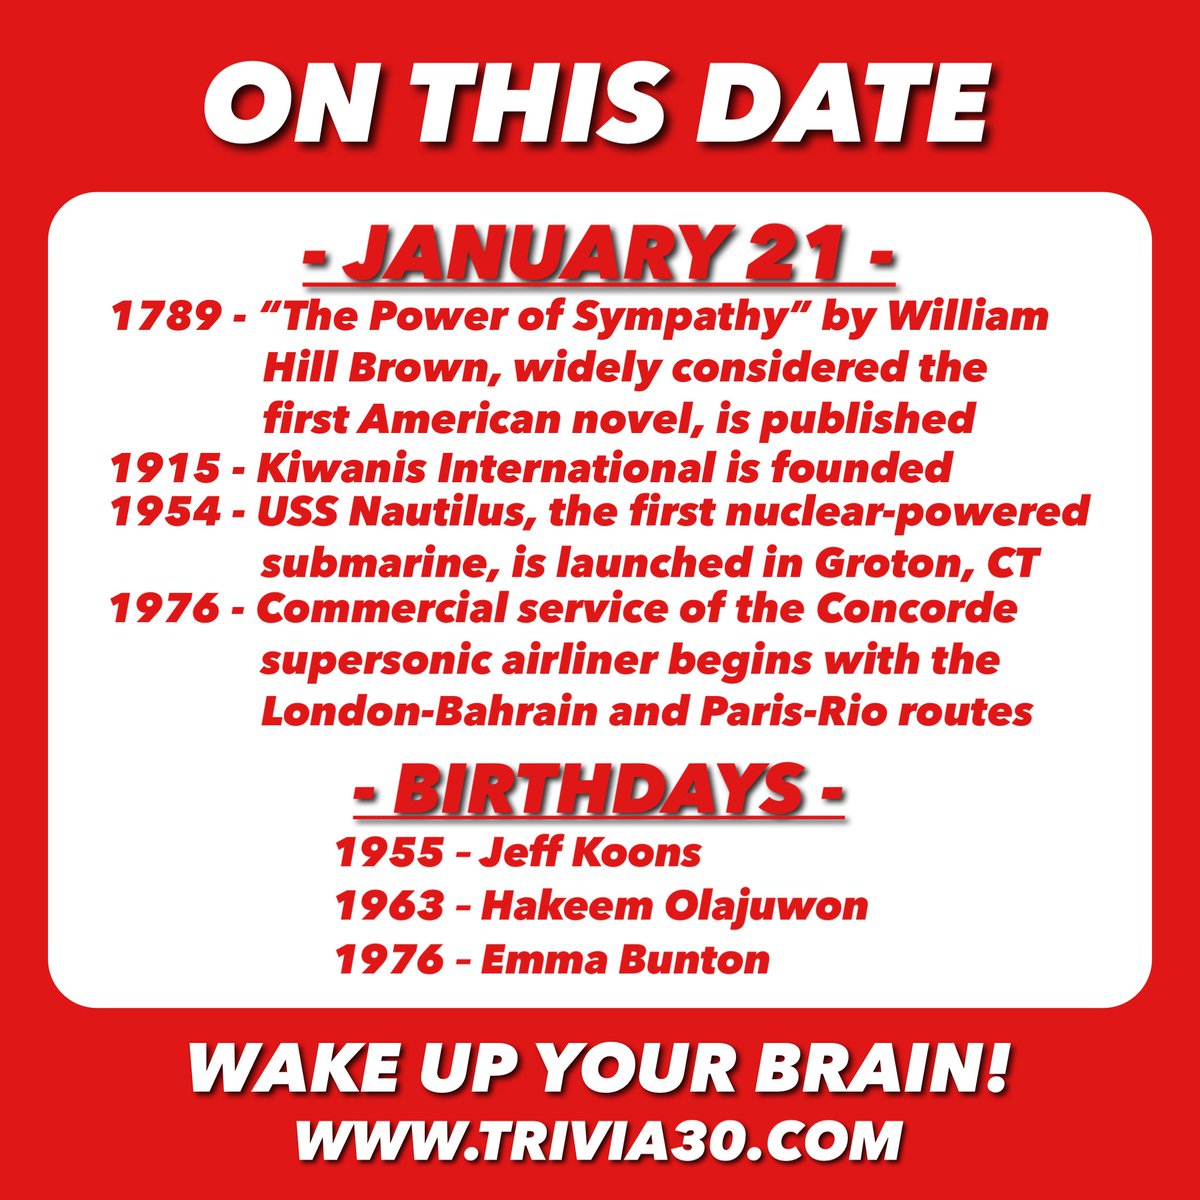 Your OTD trivia for 1/21... Have a great Sunday, and we will see you all soon! #TRIVIA30 #WakeUpYourBrain #OnThisDay #novels #Kiwanis #USNavy #USSNautilus #GrotonCT #Concorde #supersonic #JeffKoons #HakeemOlajuwon #EmmaBunton #BabySpice #SpiceGirls